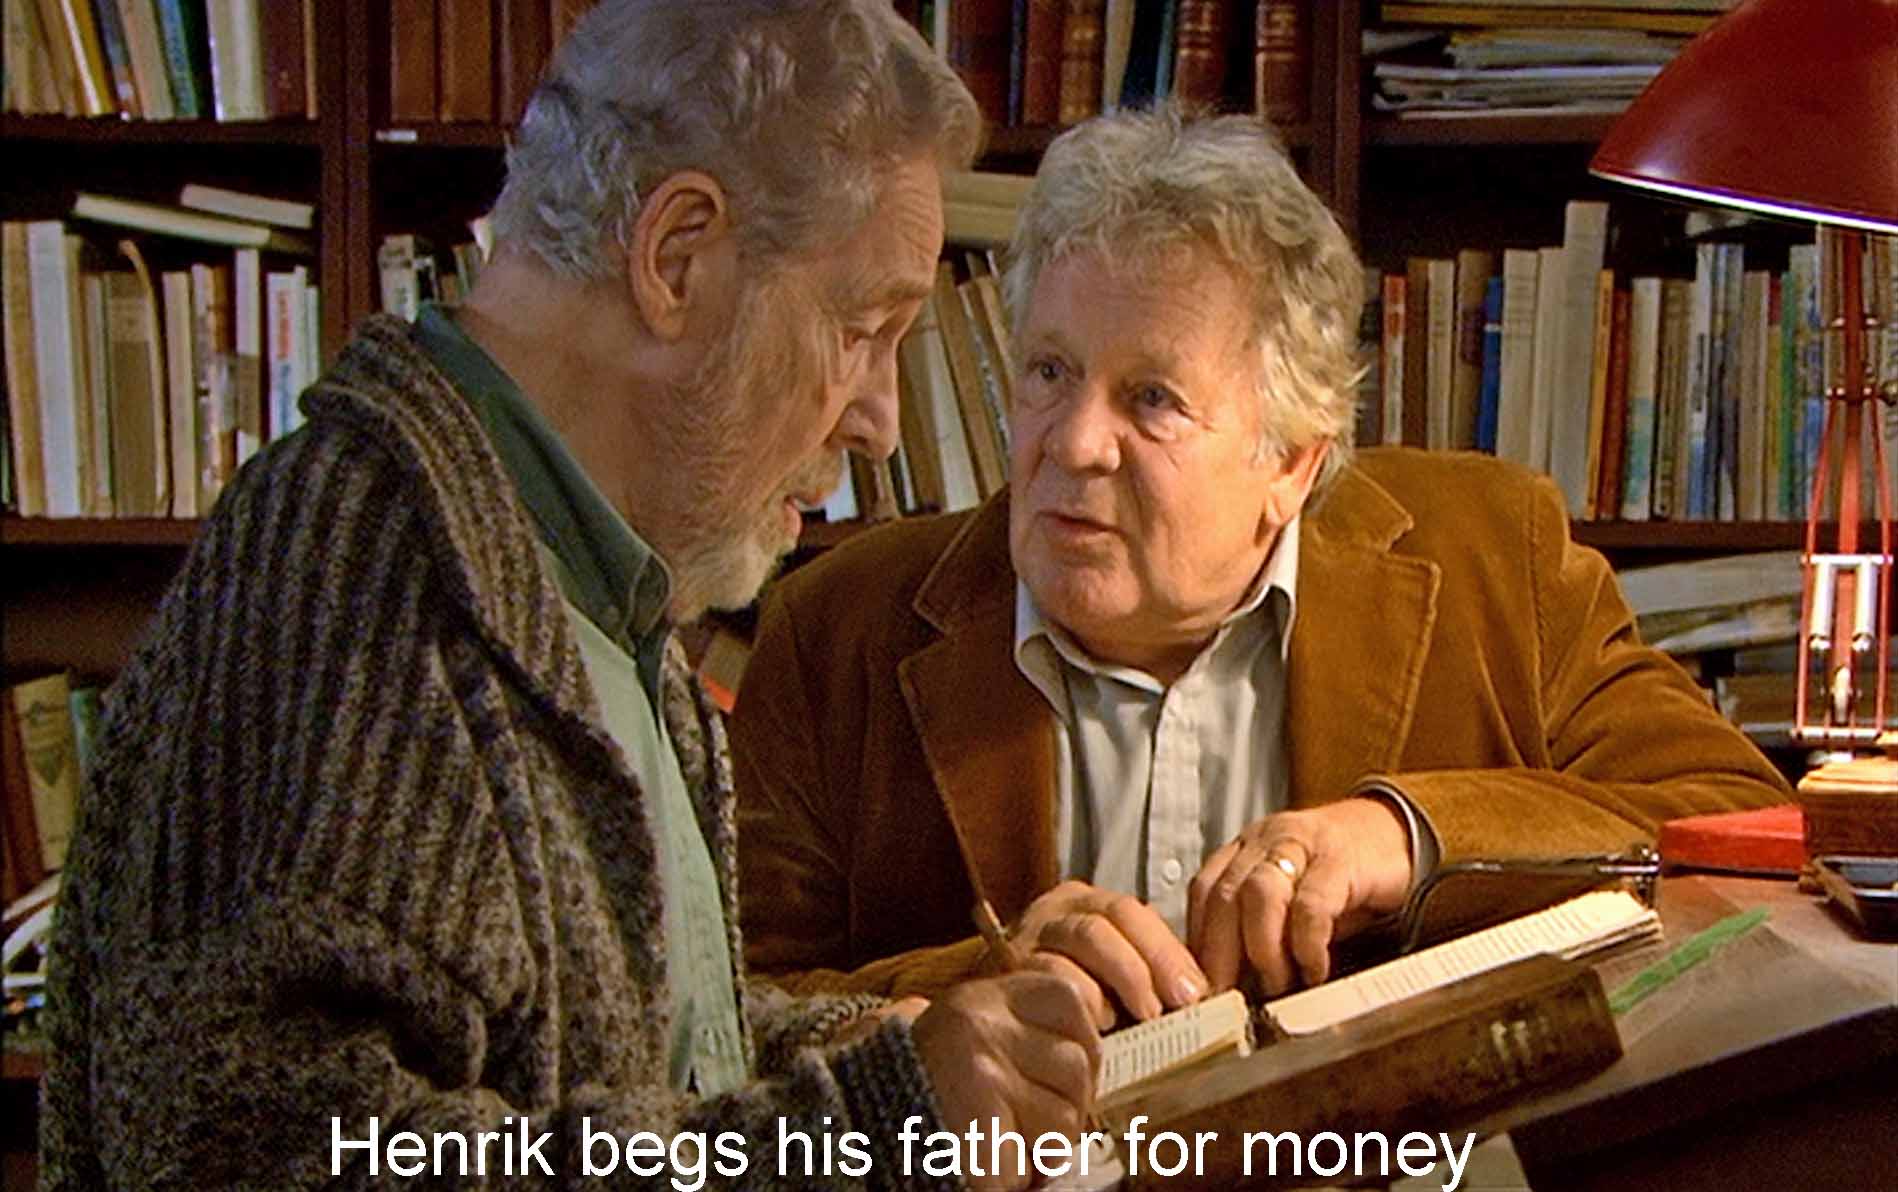 Henrik begs his father for money